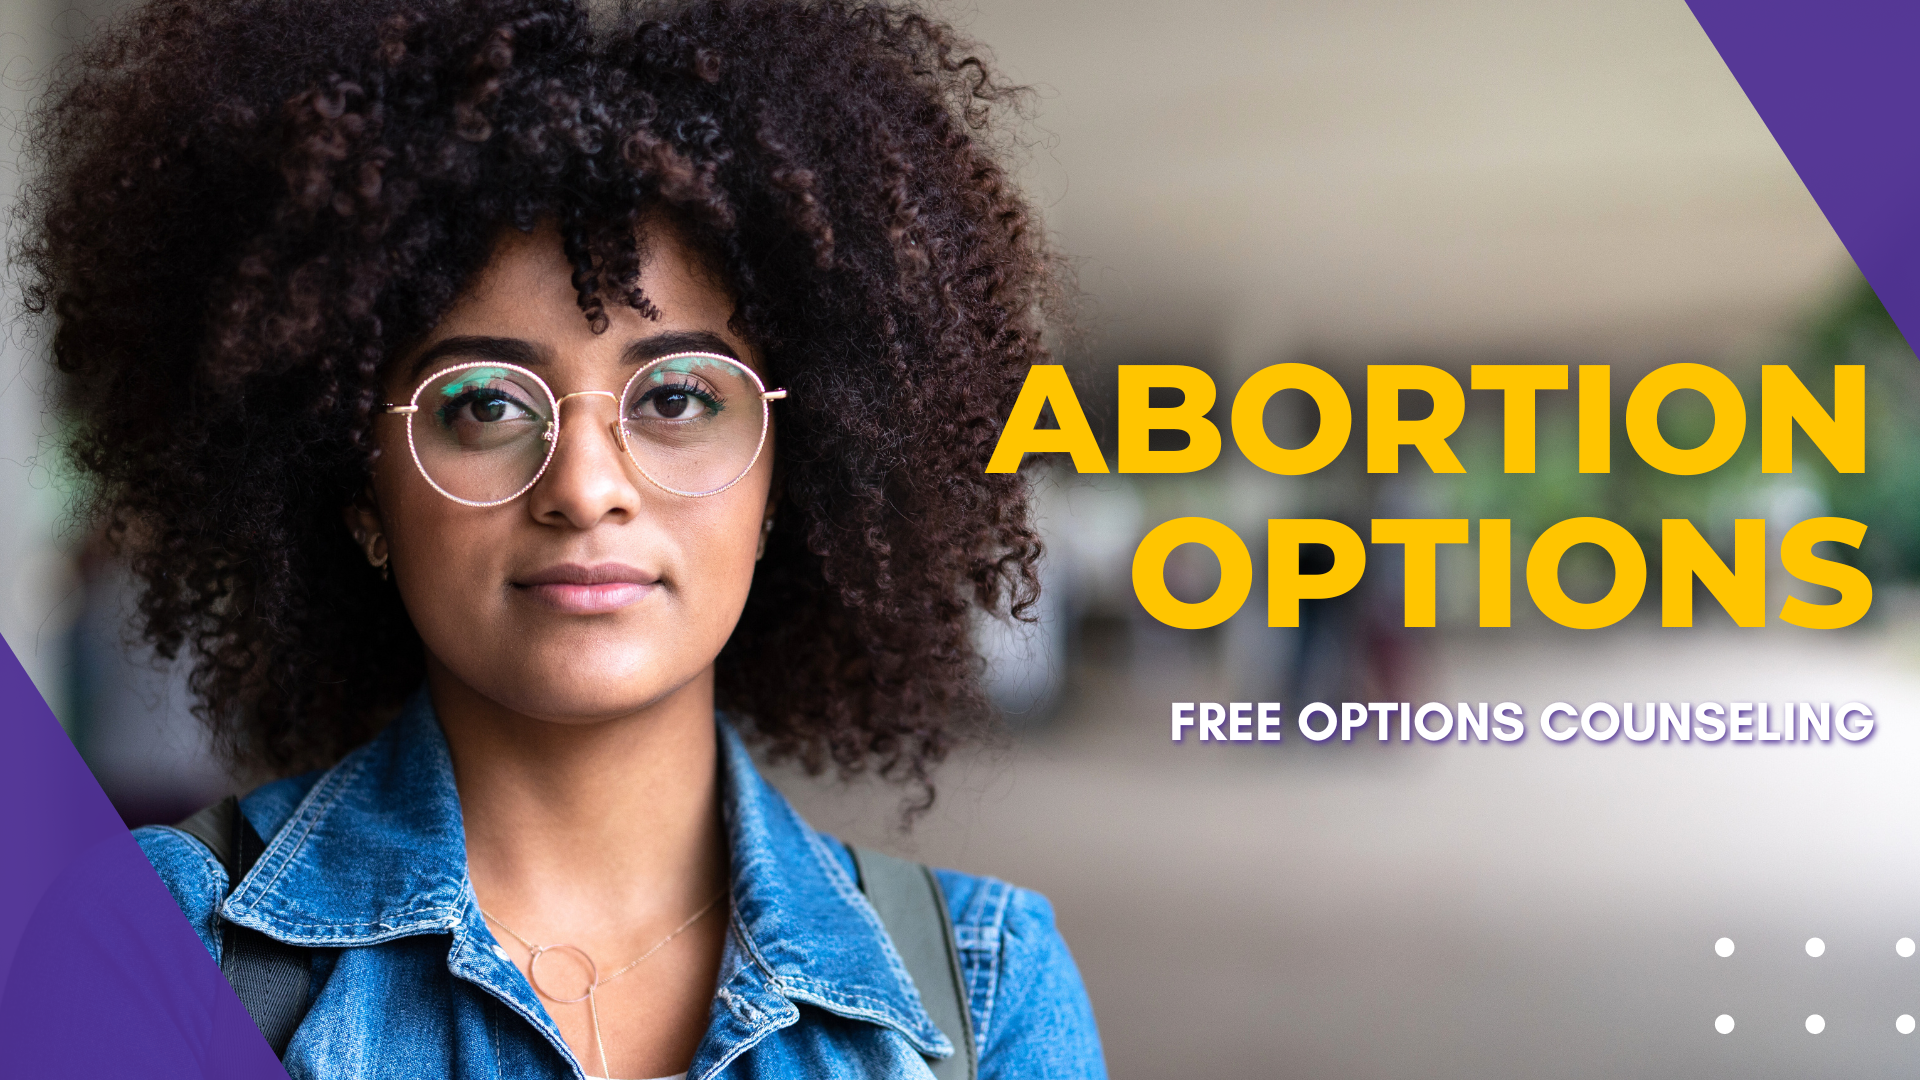 Abortion options in Detroit, Southfield, Michigan - free options counseling at the Problem Pregnancy Center. 

Free abortion, free abortion information, free abortion counseling, free ultrasound near me, free ultrasound, free pregnancy test near me, abortion pills near me, free abortion pills, free abortion pills near me, planned parenthood near me, planned parenthood for free, abortion Detroit, abortion Southfield, abortion in Michigan, the Problem Pregnancy Center, abortion cost, abortion free near me, abortion pills free near me, I need an abortion, I need an abortion fast, I'm pregnancy and need help.